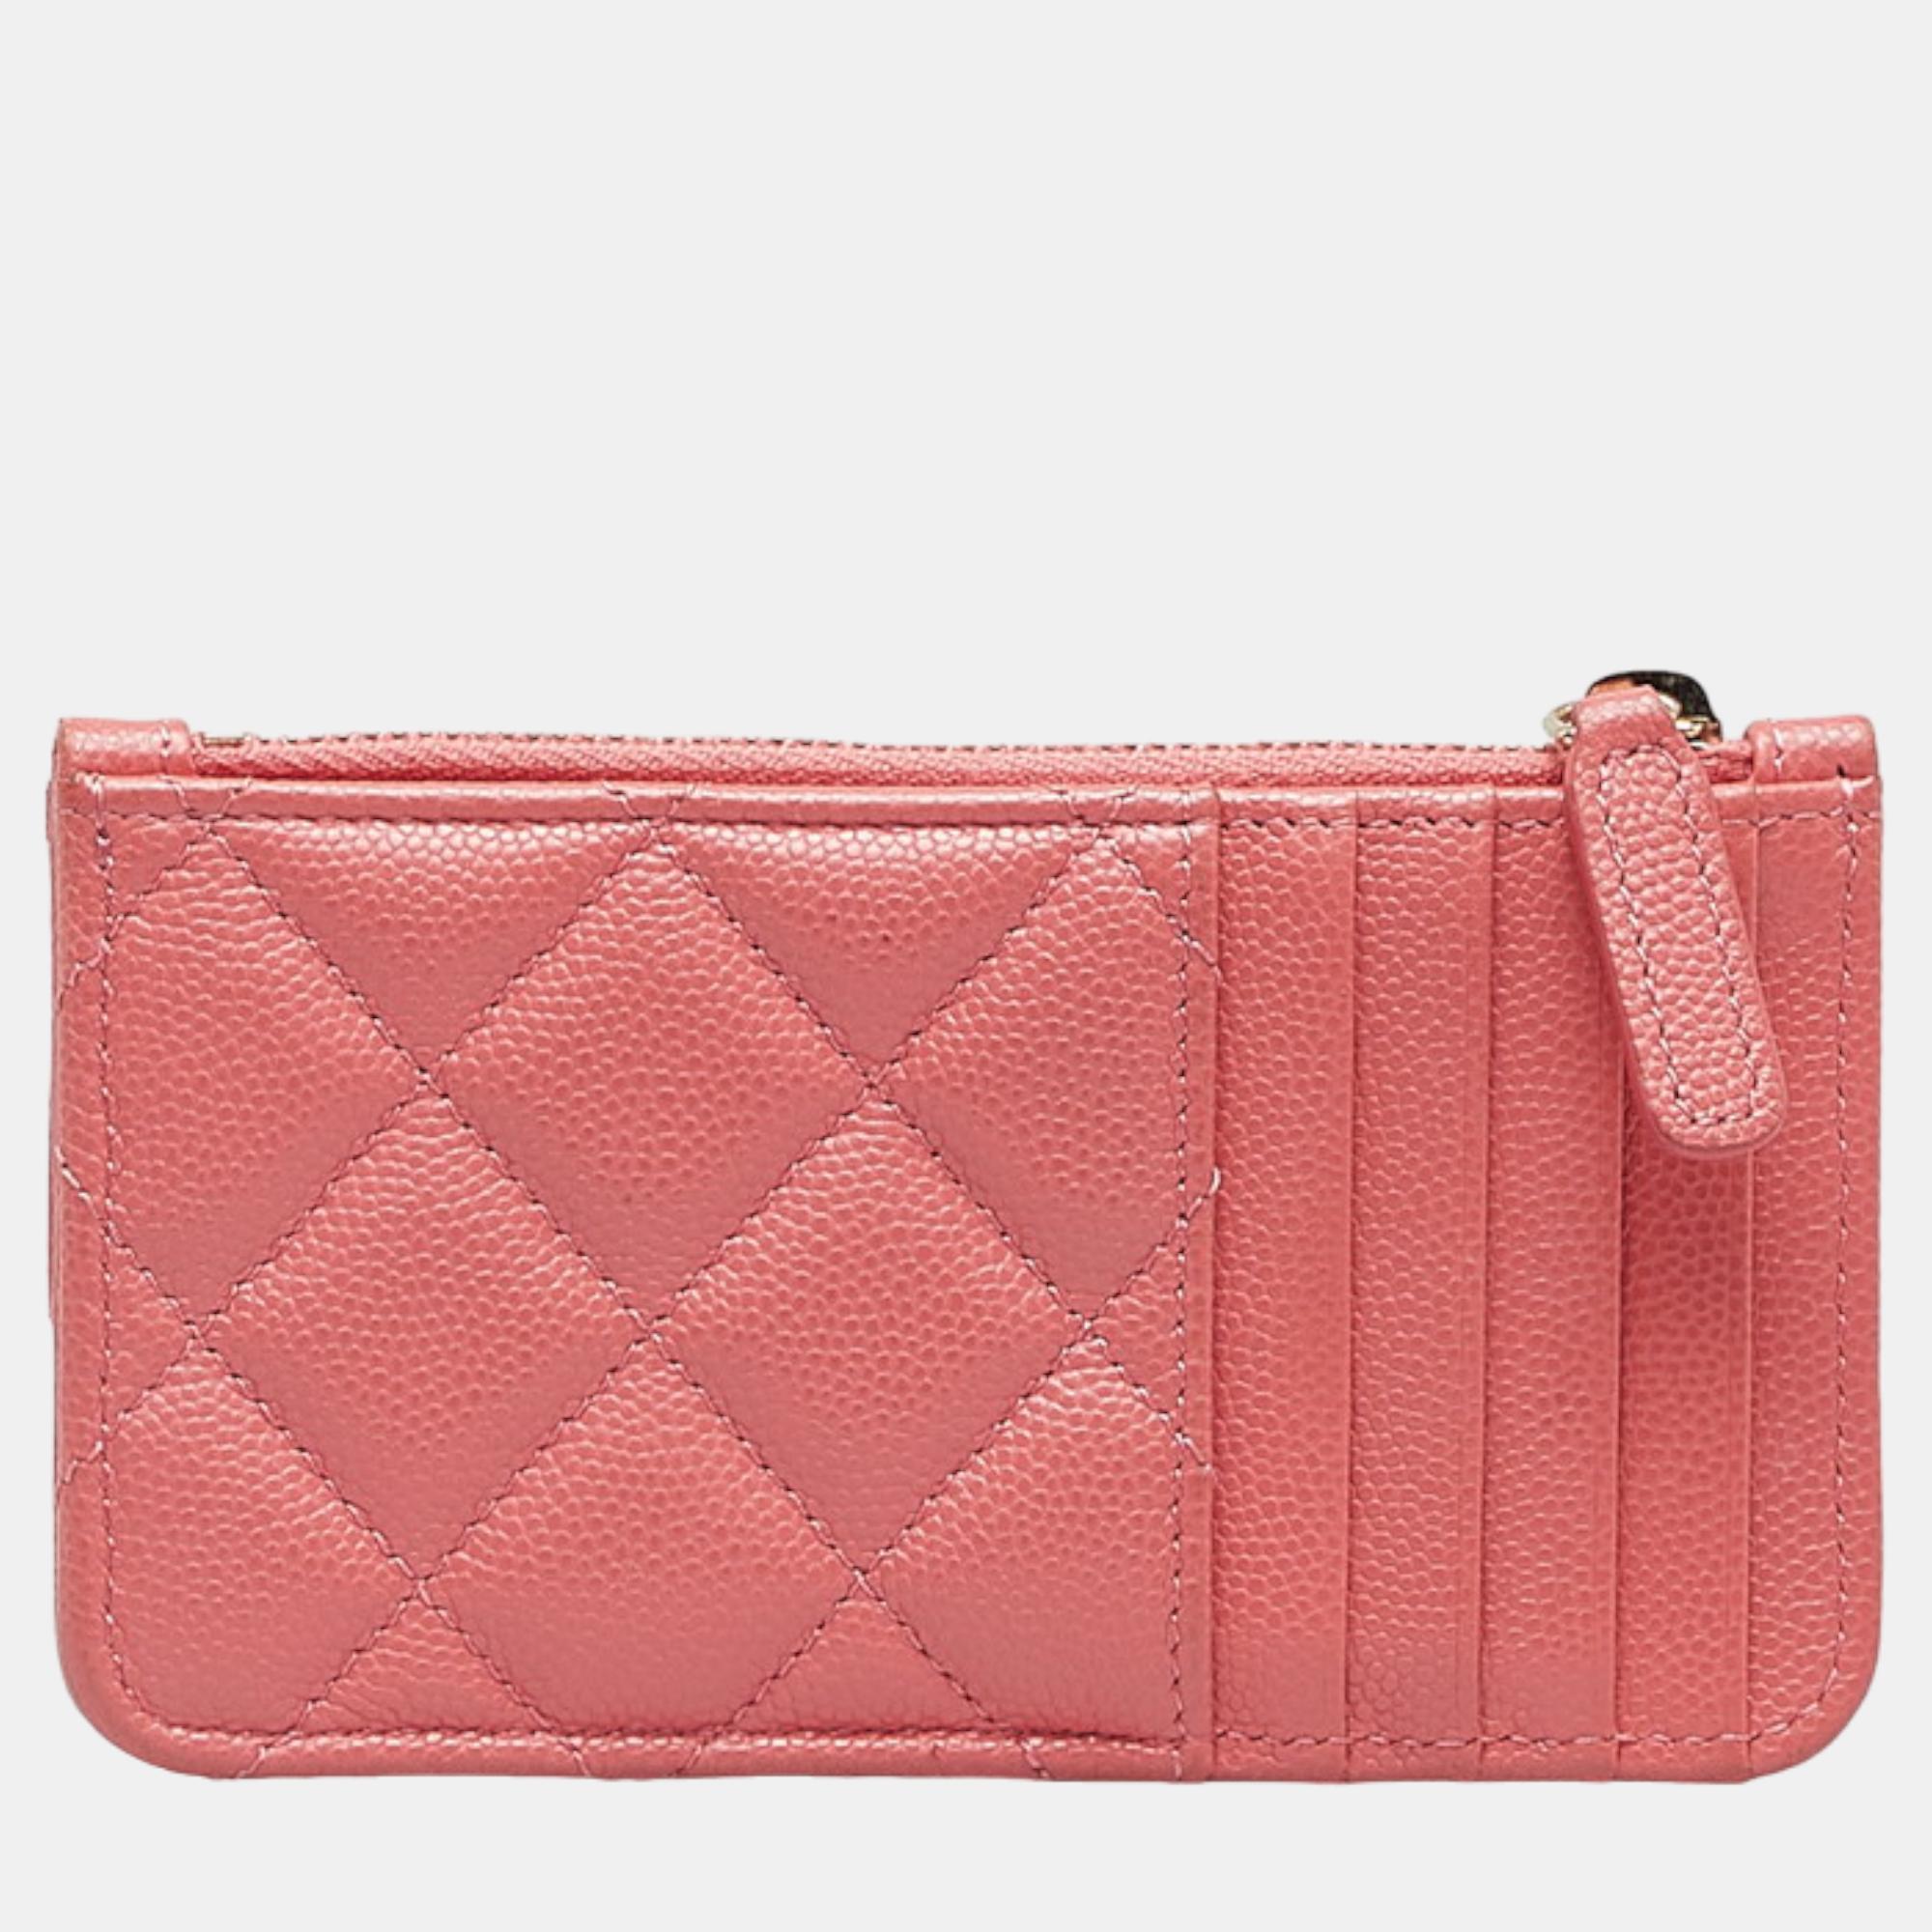 Chanel Pink Caviar Leather CC Zip Card Case